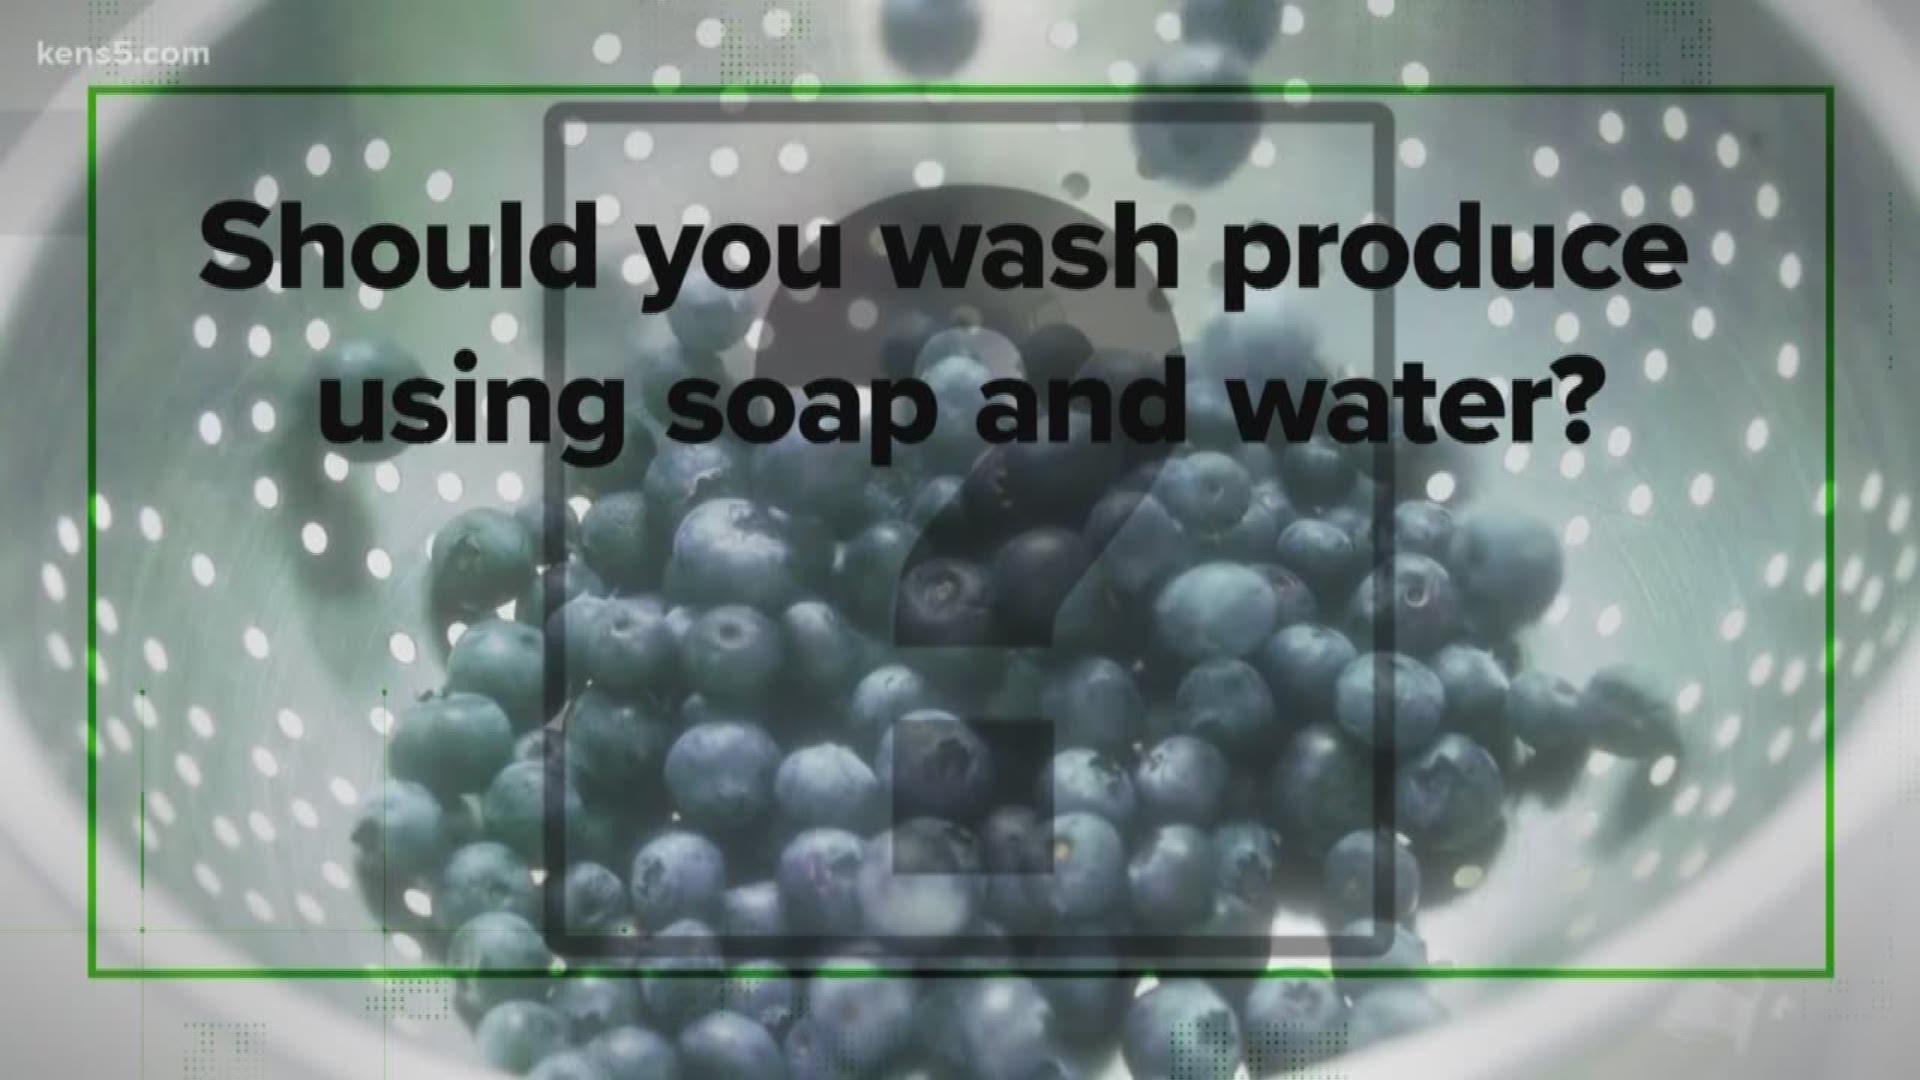 A video went viral saying you should wash produce with soap. We're verifying if that's true.